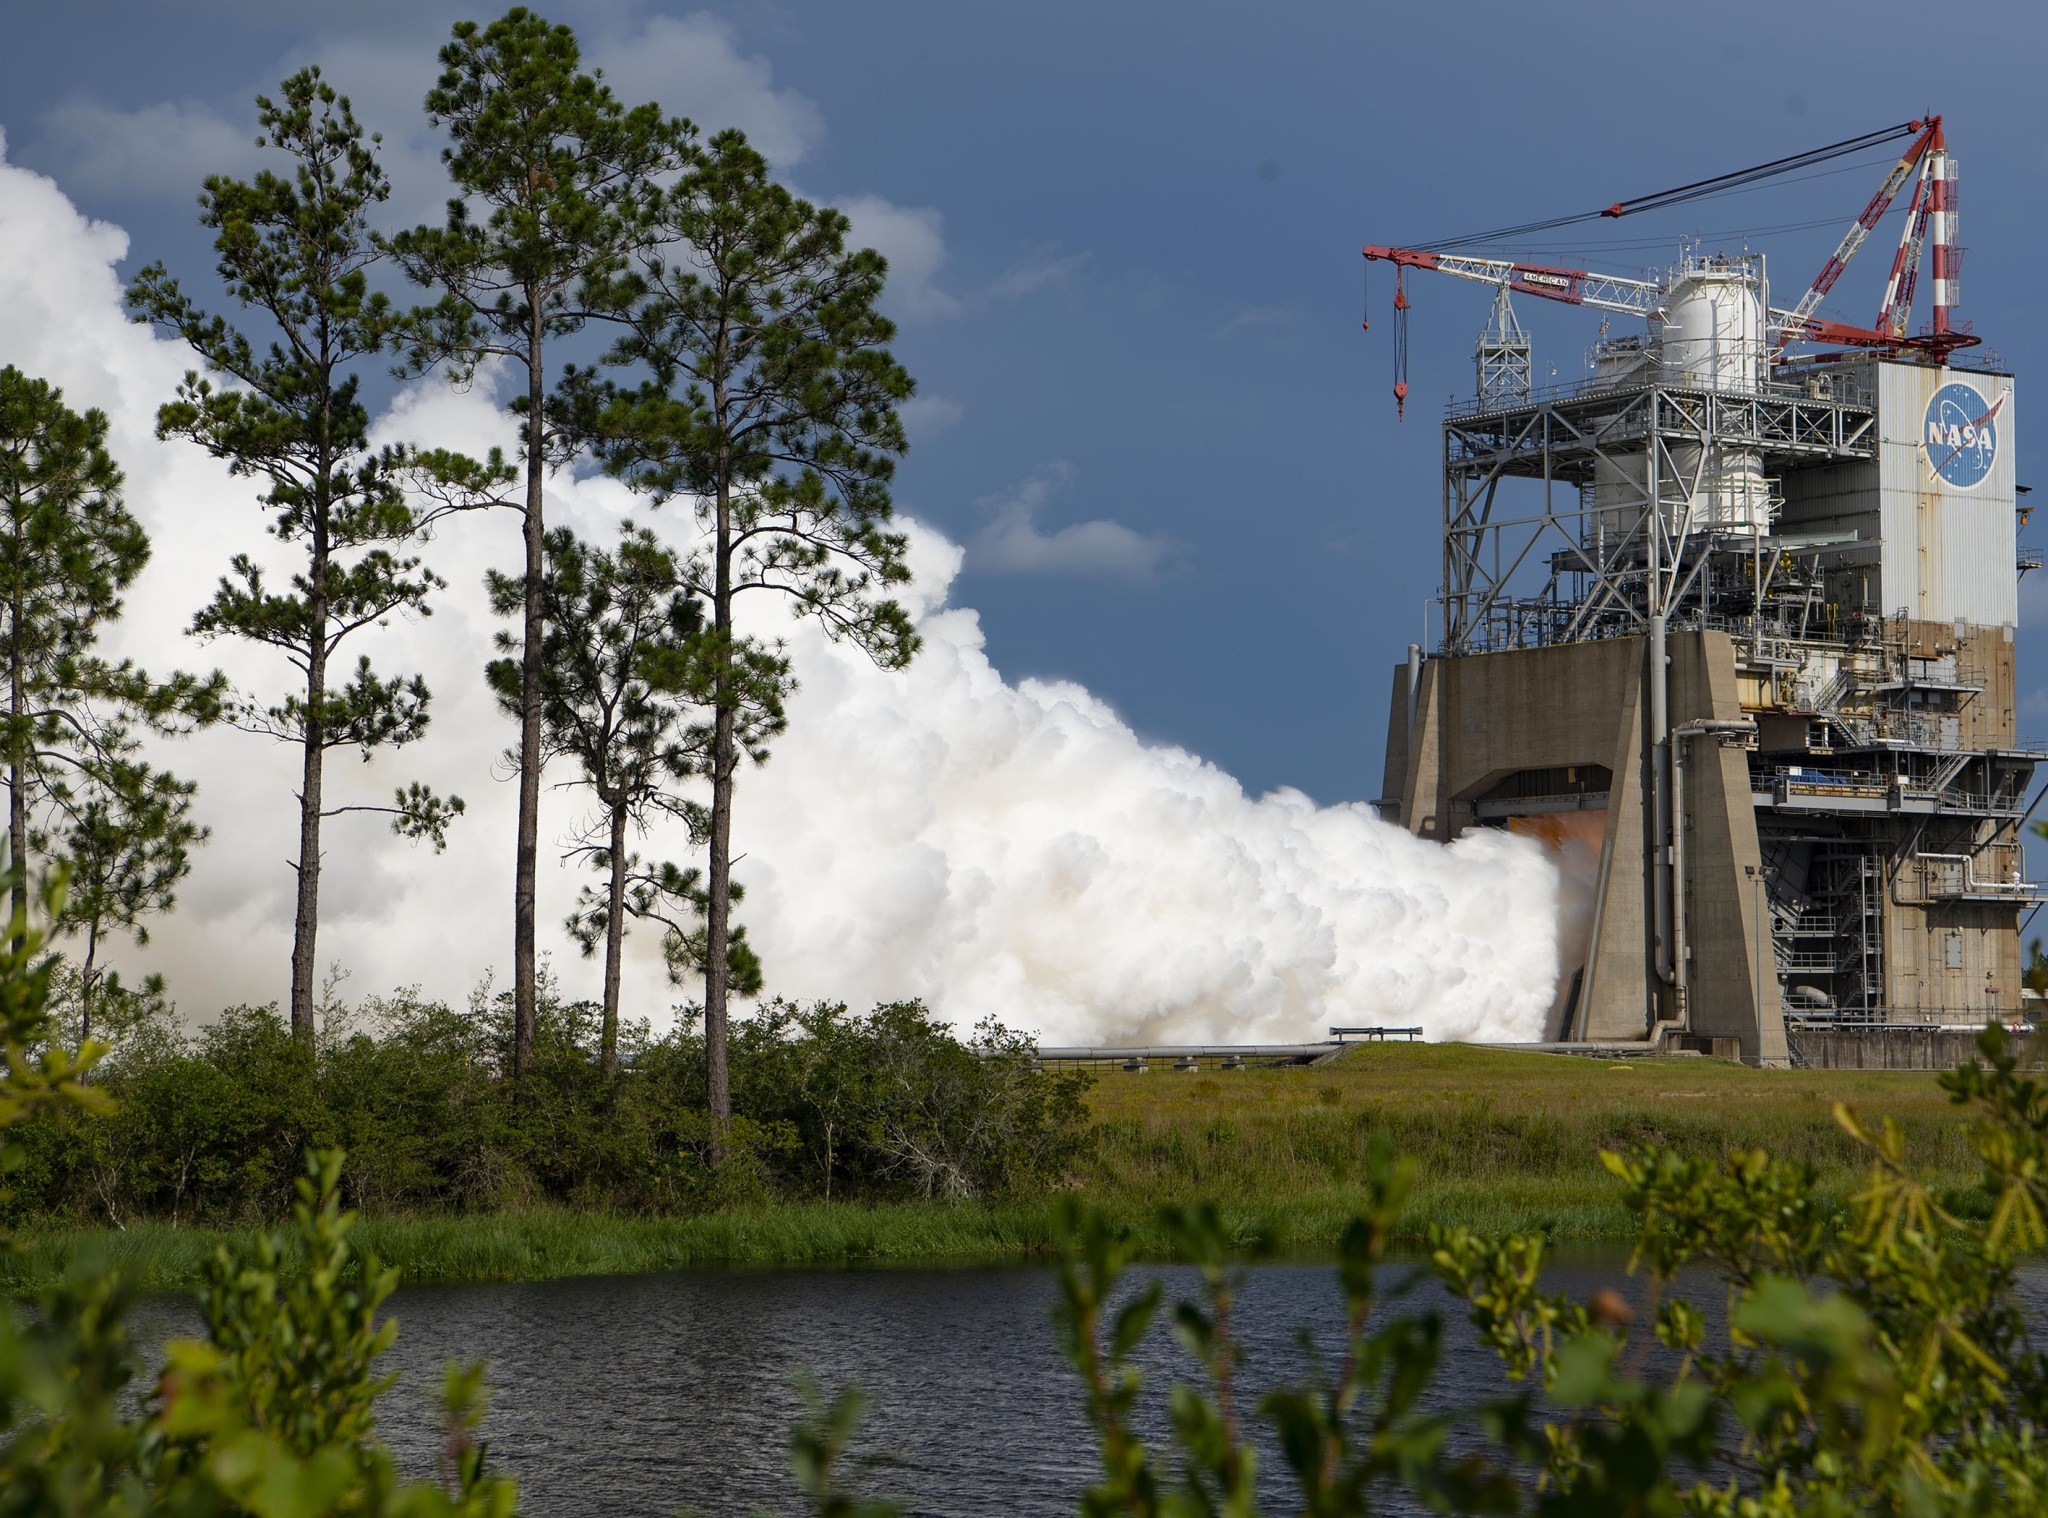 RS-25 hot fire test on the A-1 Test Stand